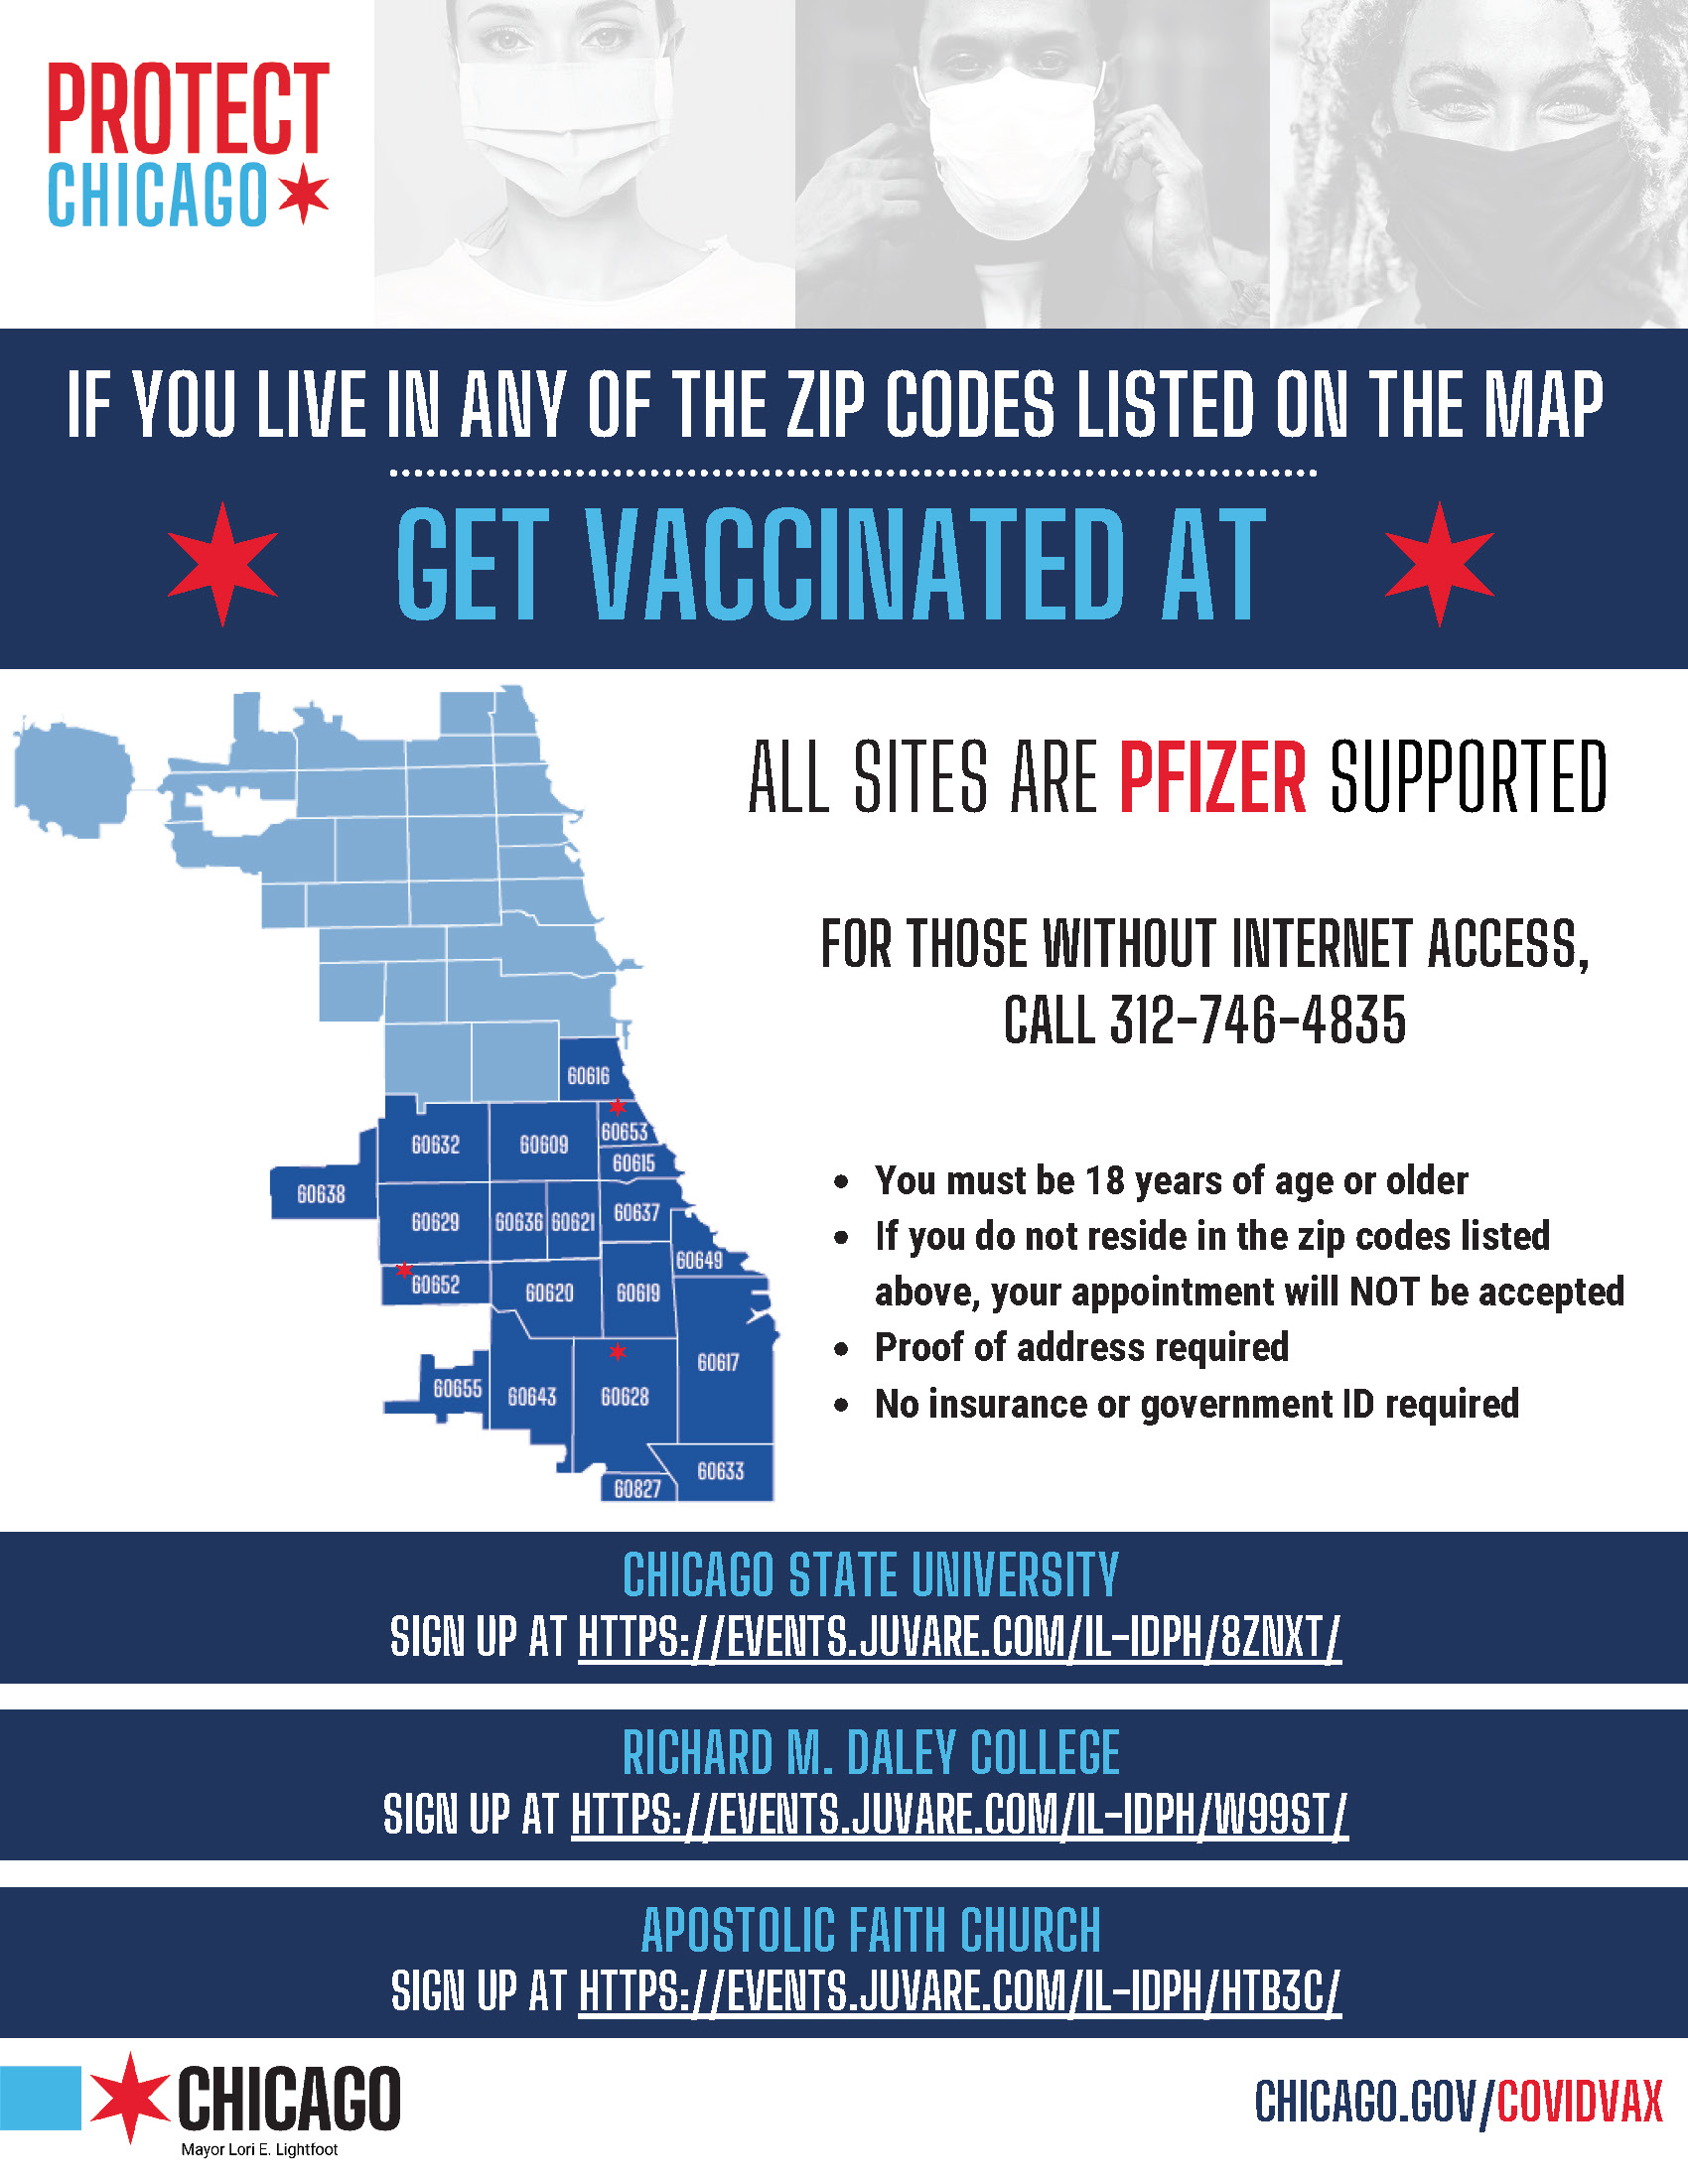 Vaccination sites in the City of Chicago